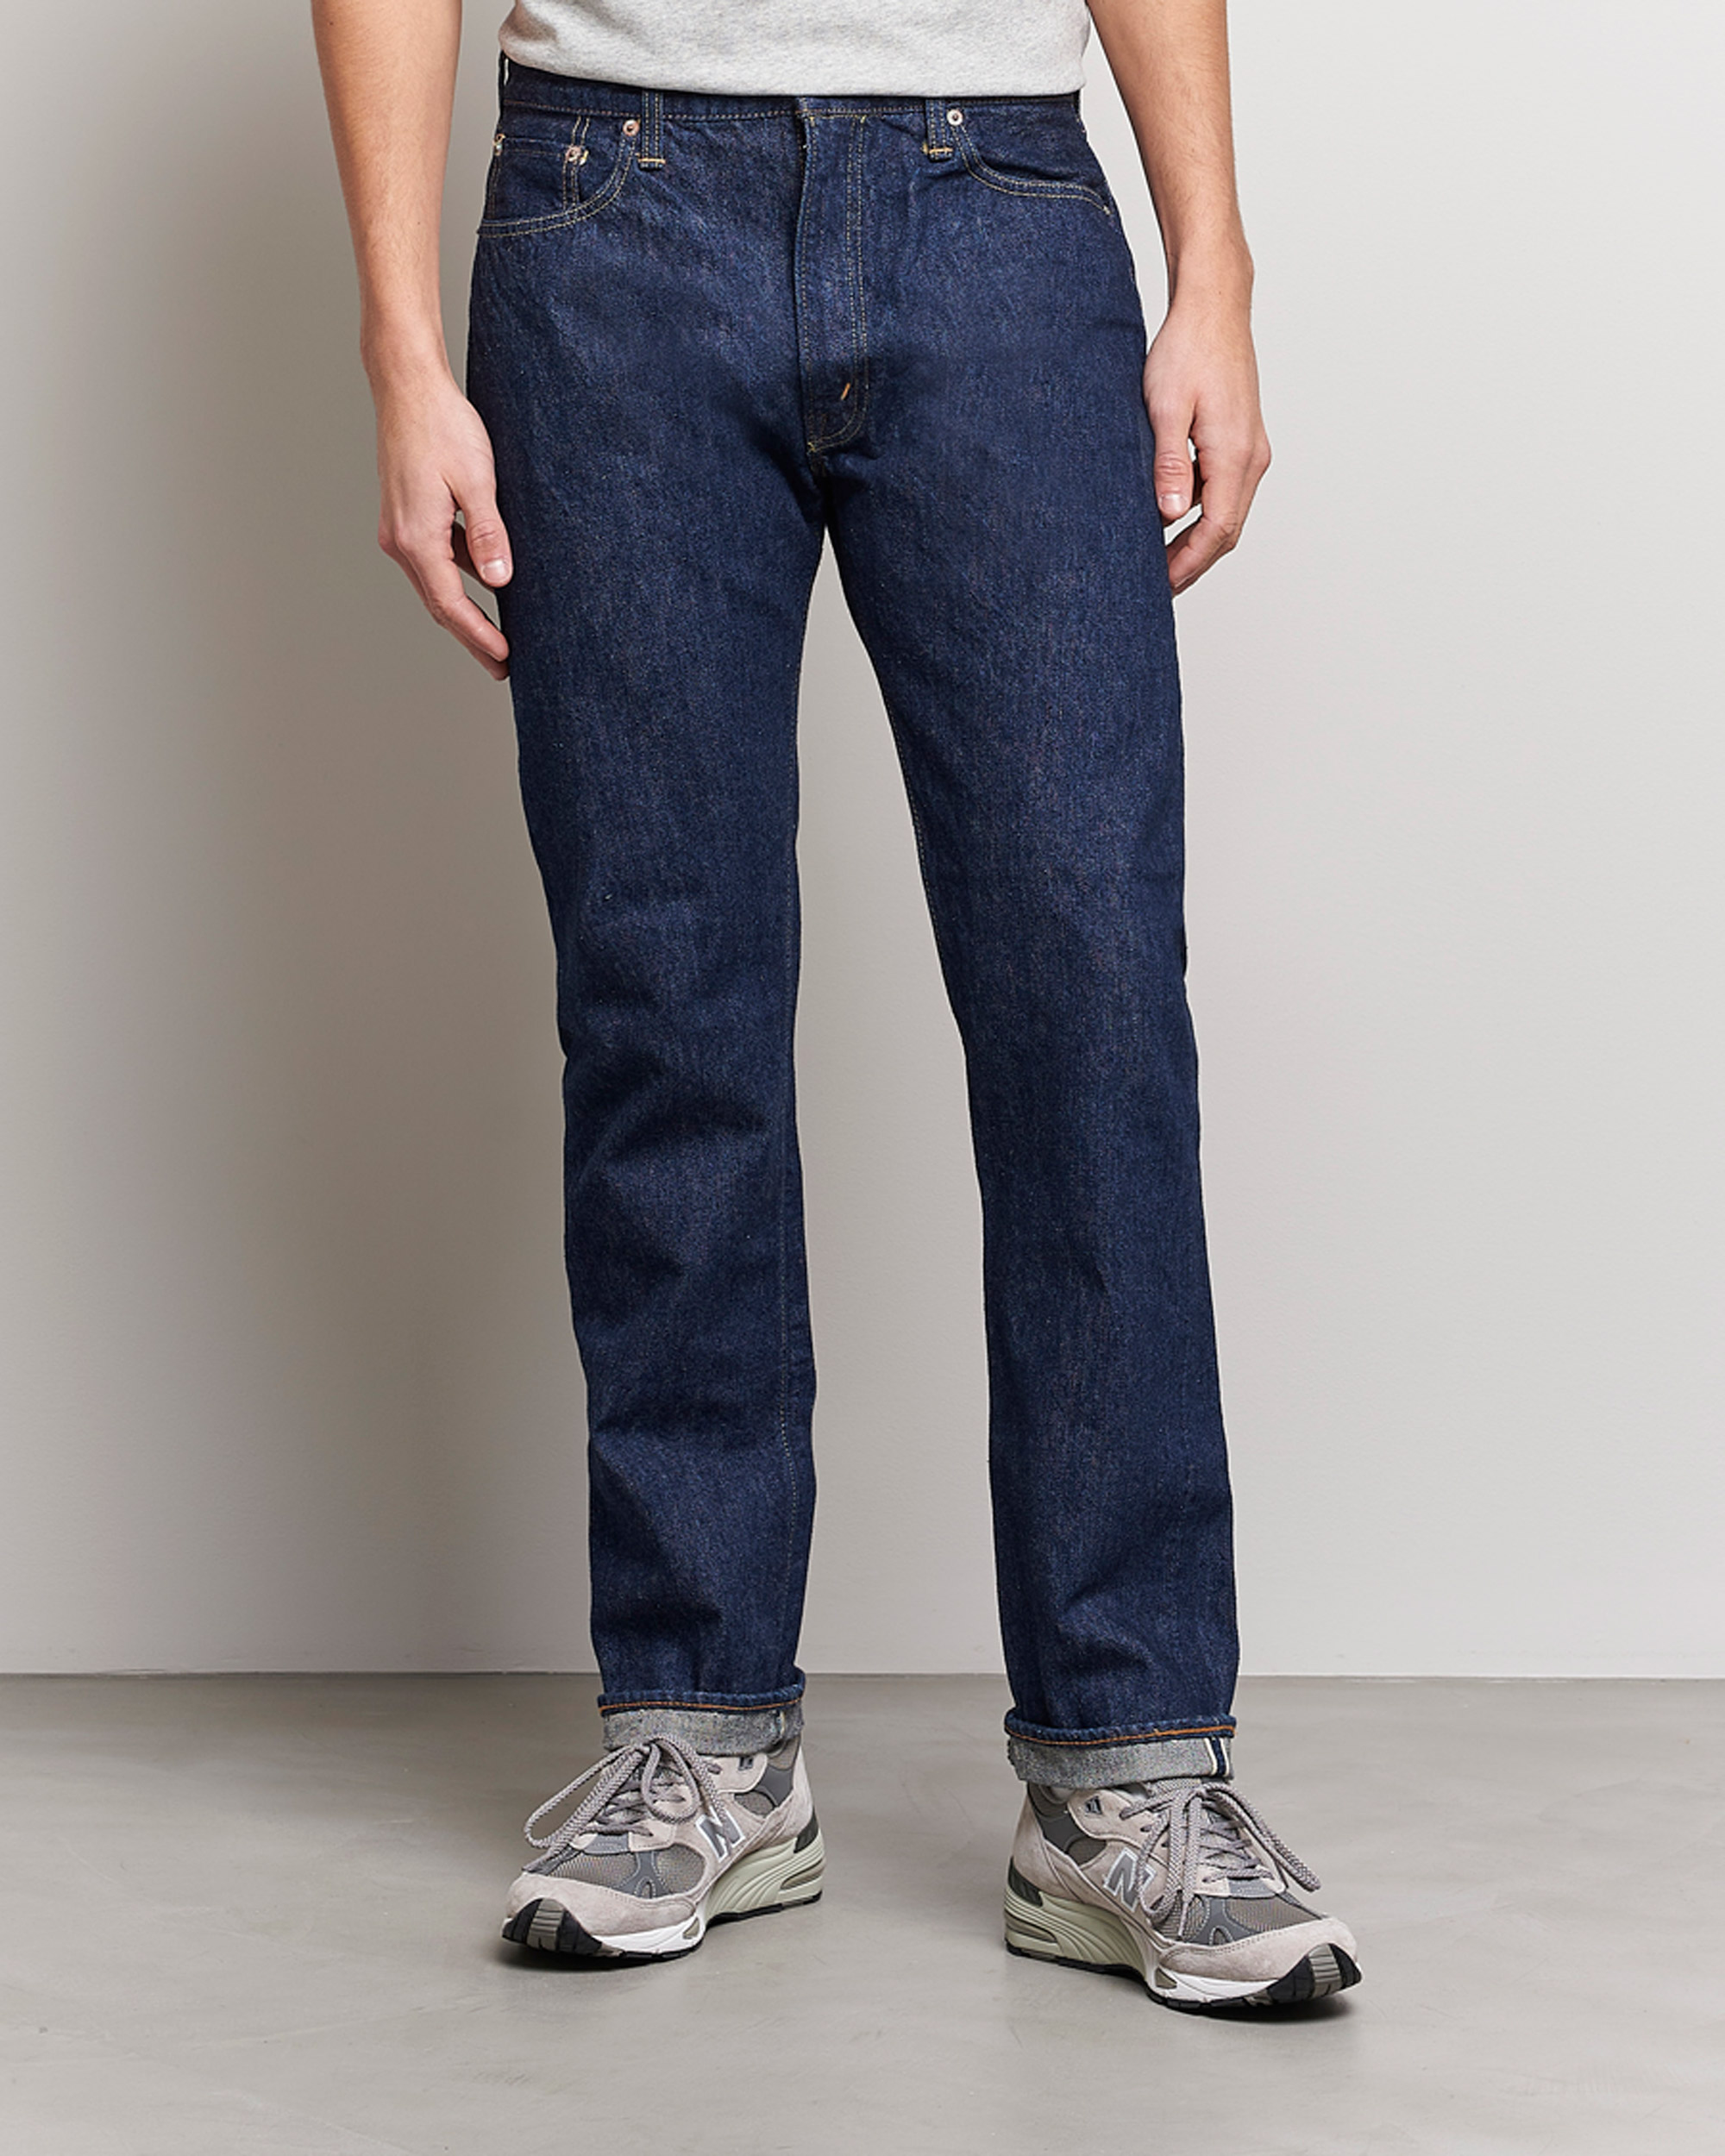 Homme | Straight leg | orSlow | Tapered Fit 107 Selvedge Jeans One Wash